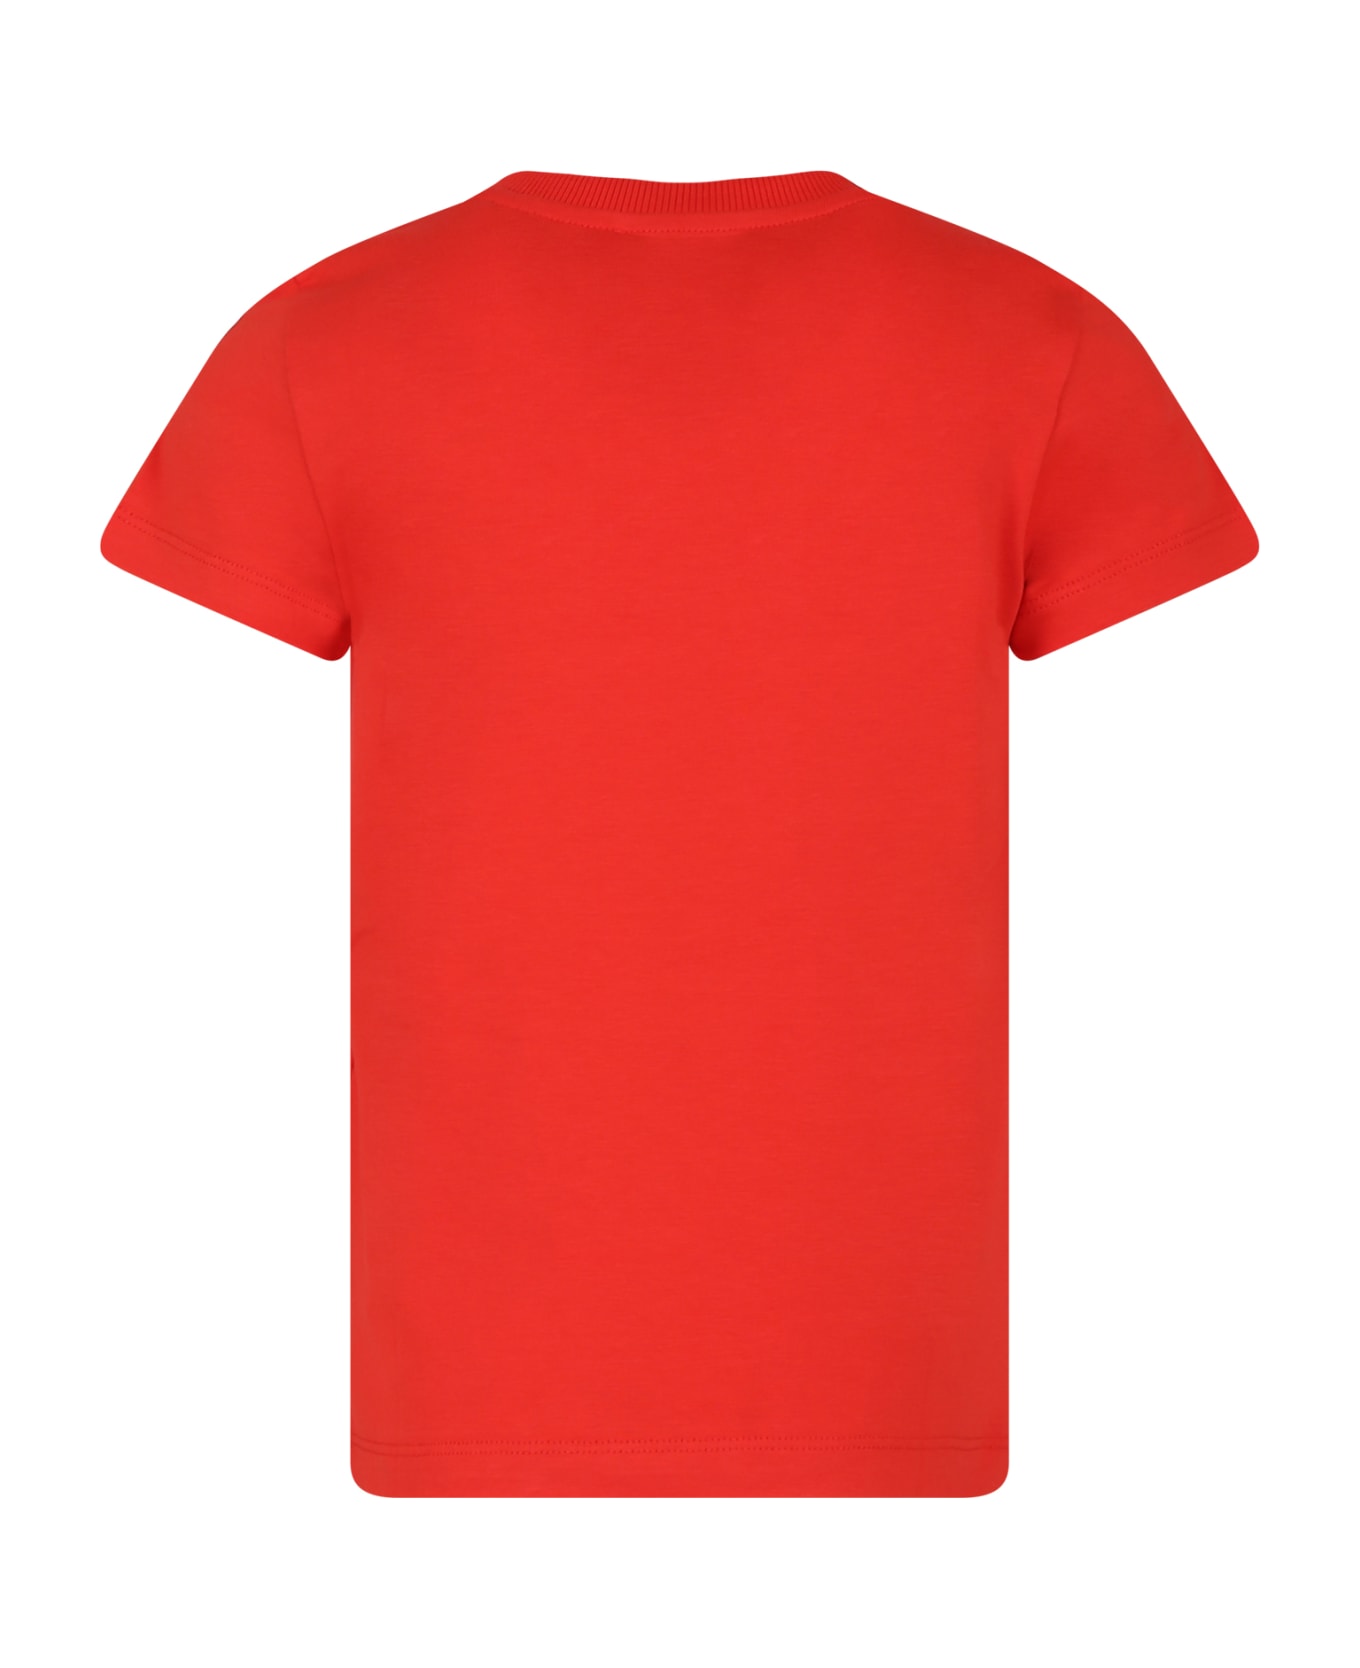 Moschino Red T-shirt For Kids With Logo - Red Tシャツ＆ポロシャツ